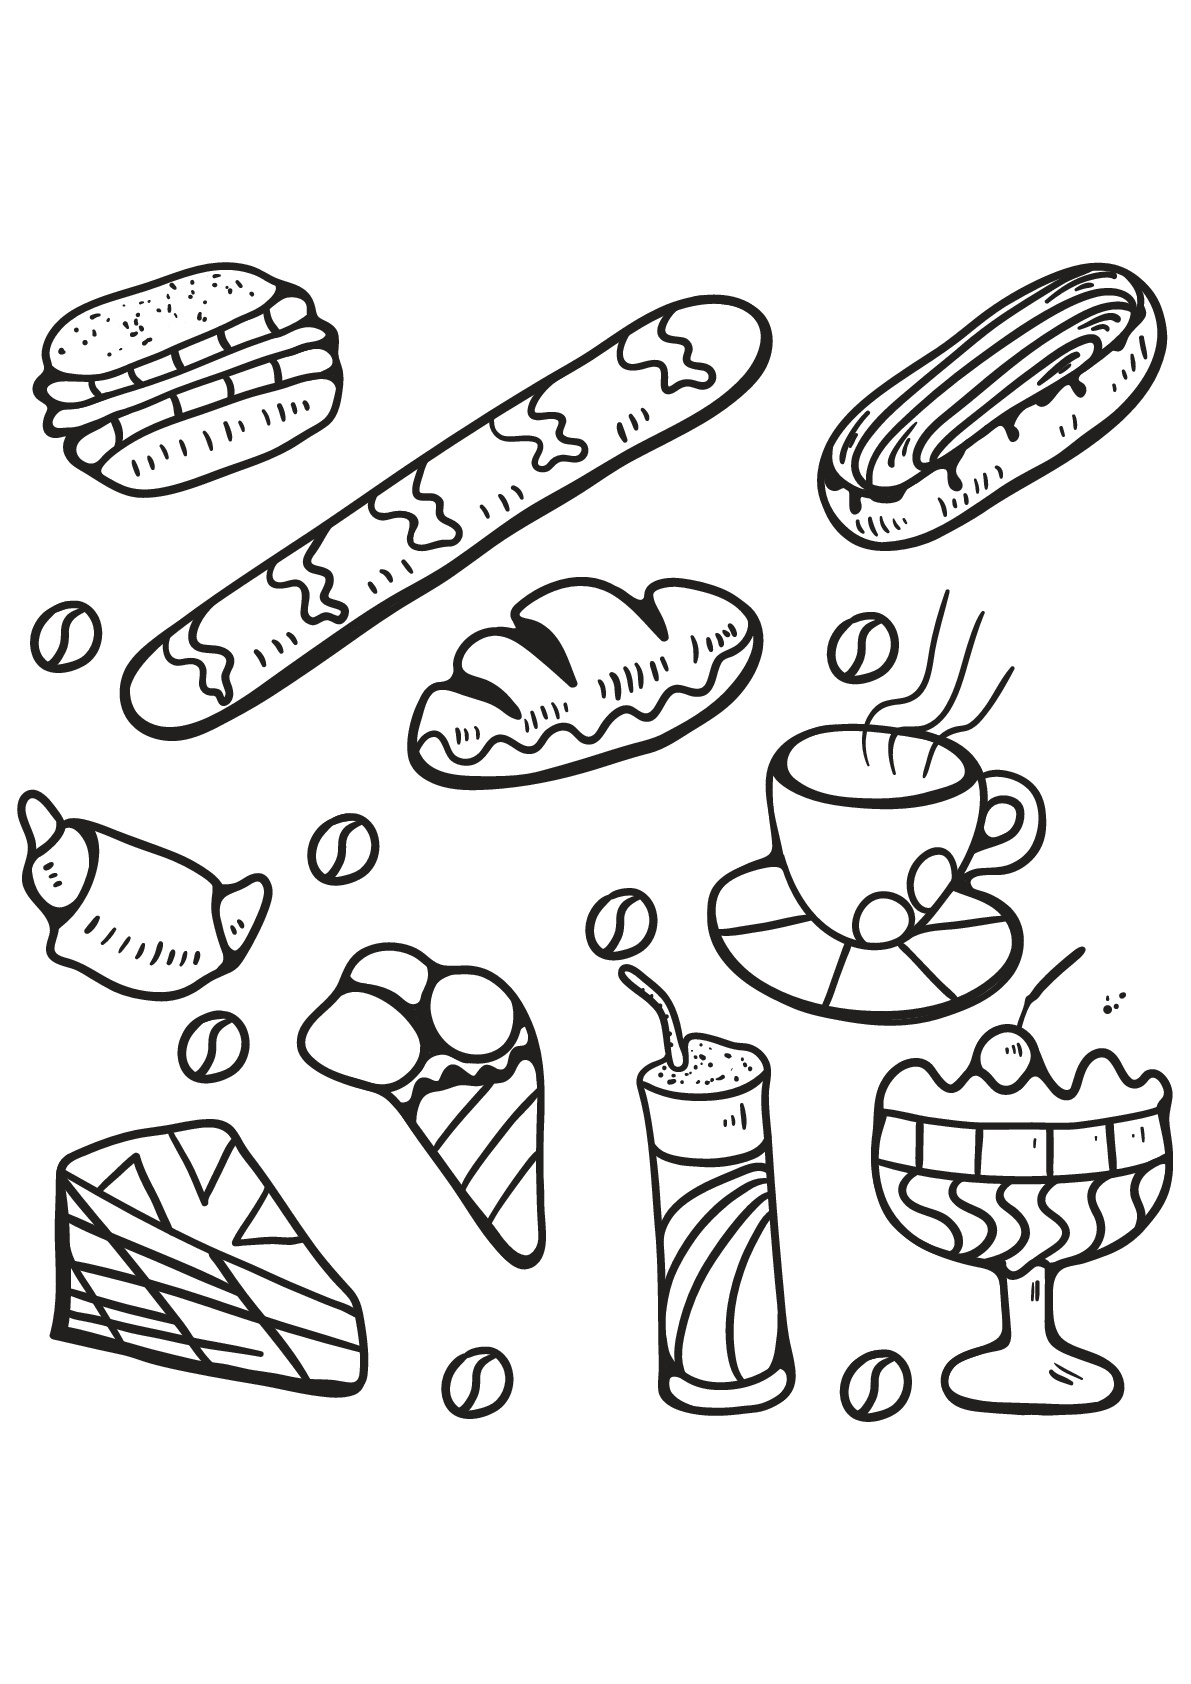 food coloring pages for adults